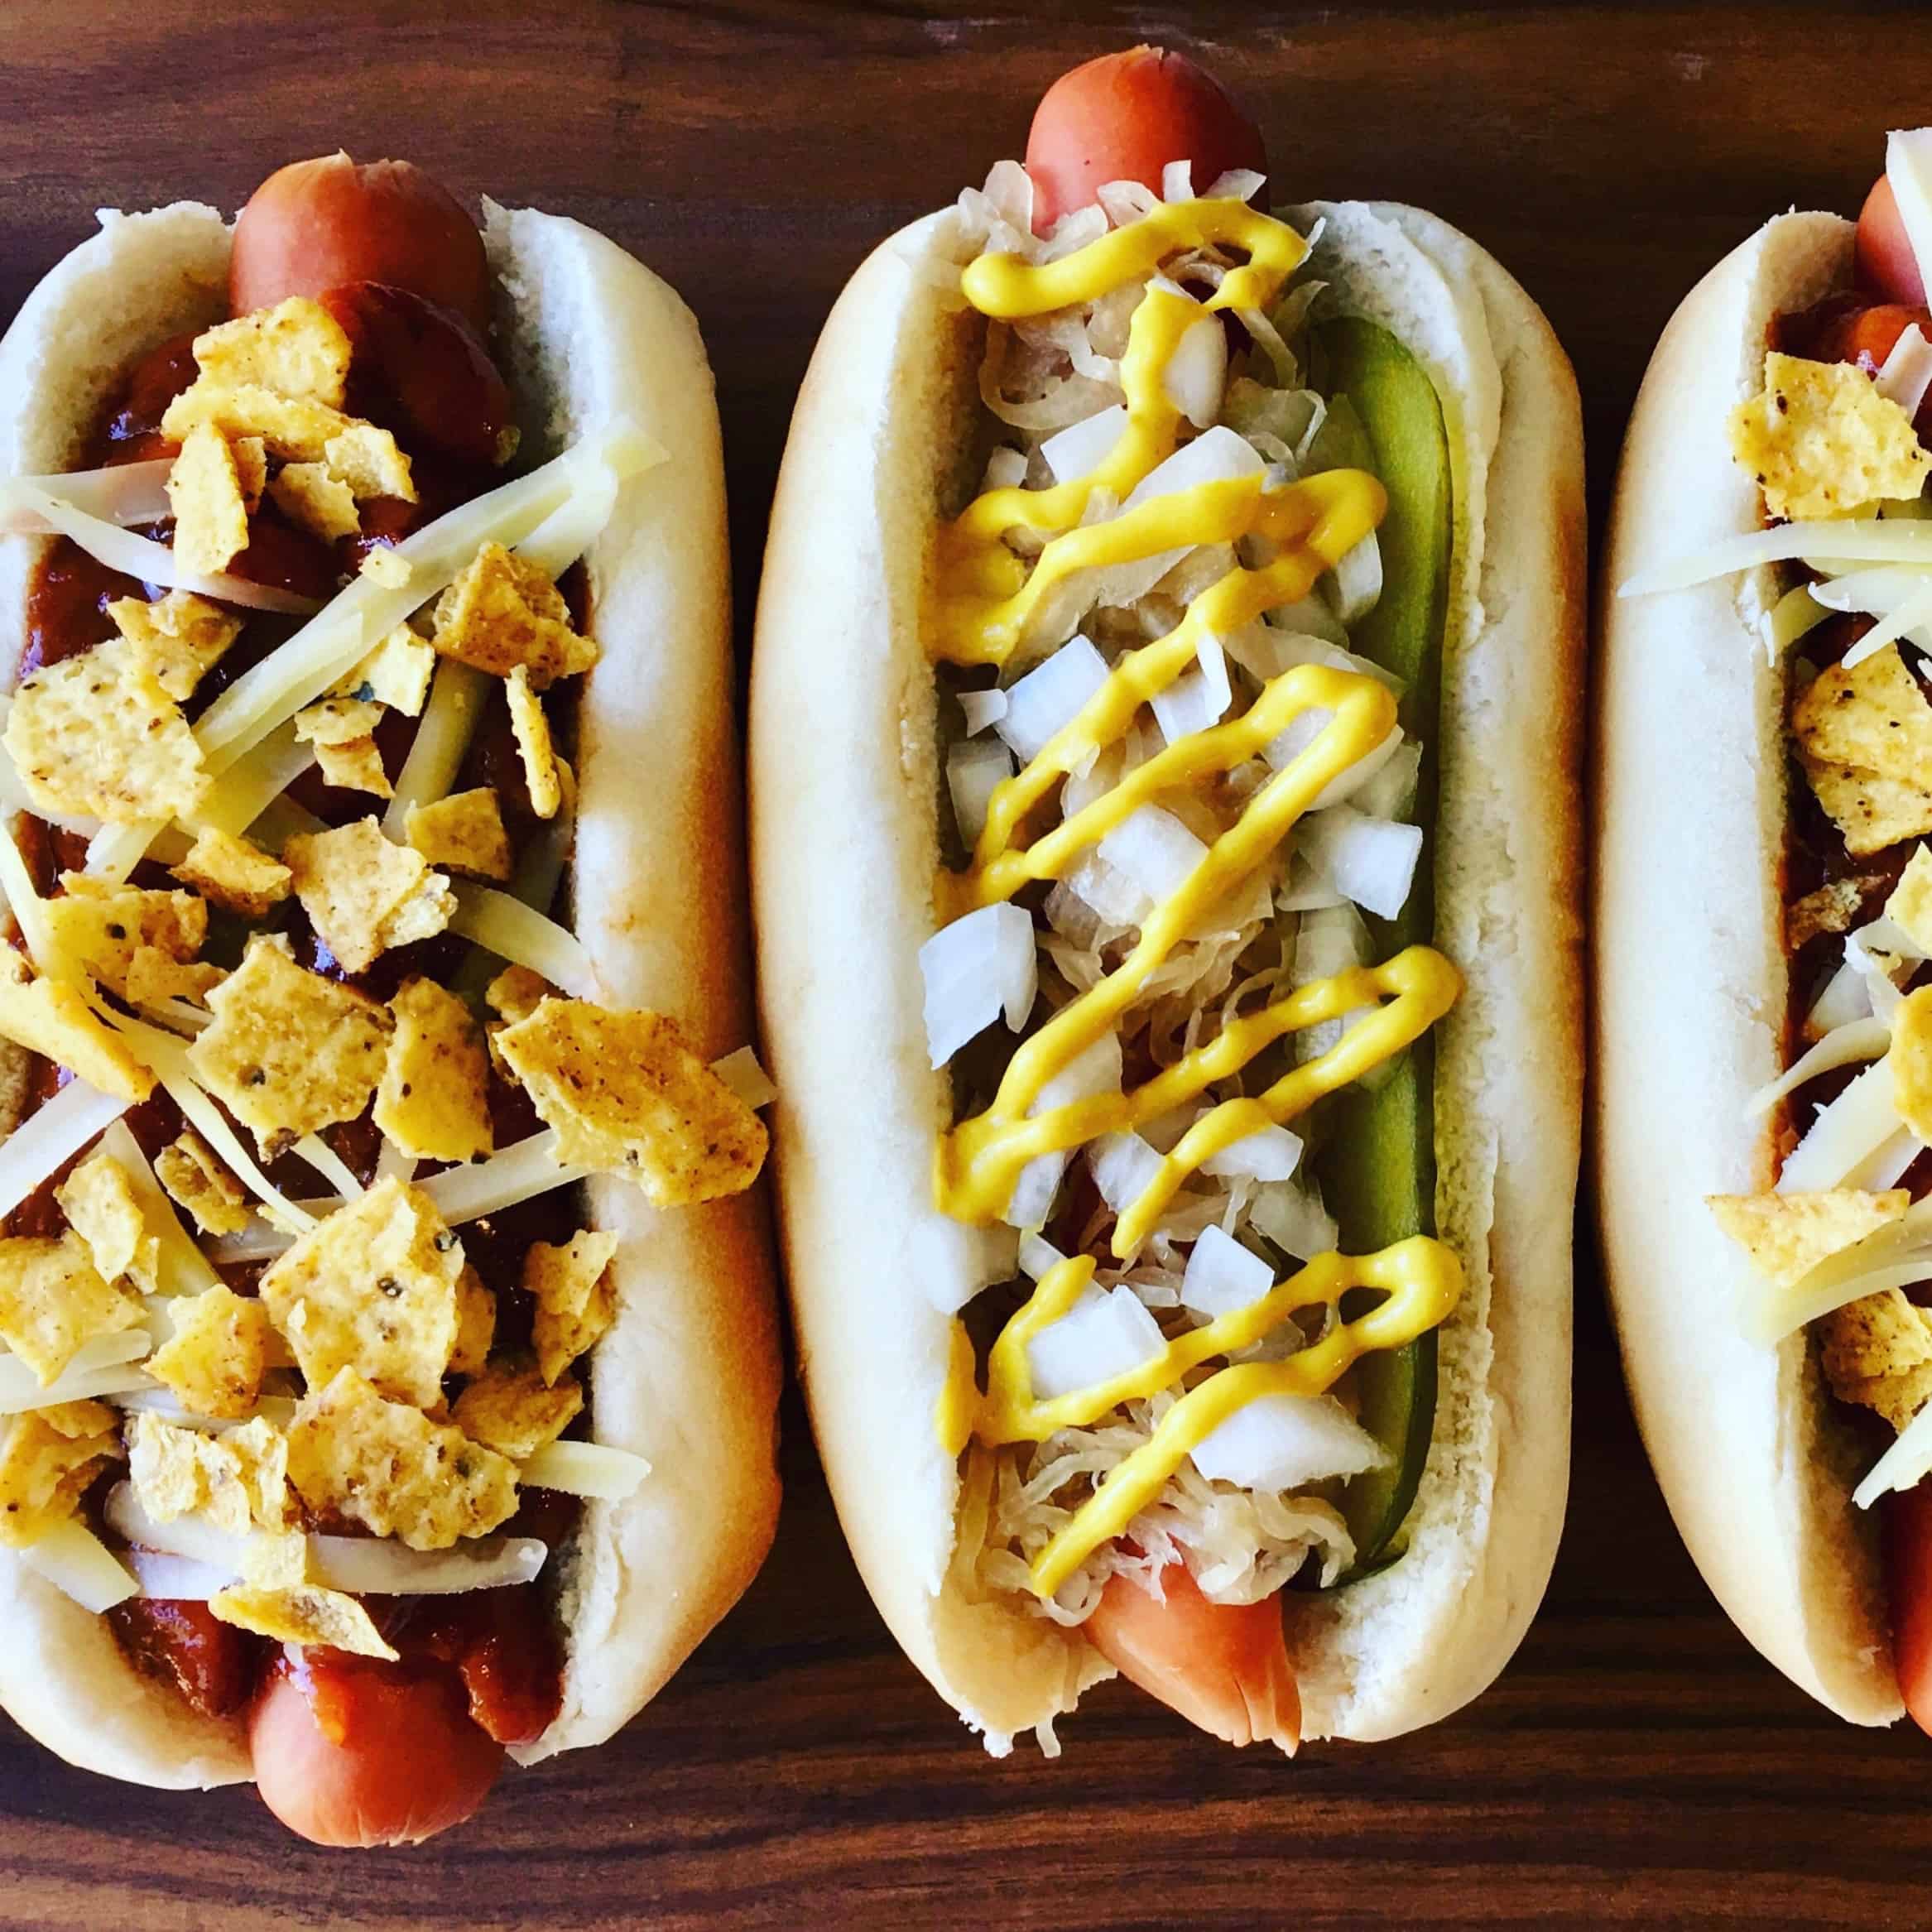 Hot Dog Toppings - Chili Dogs and Sauerkraut Dogs